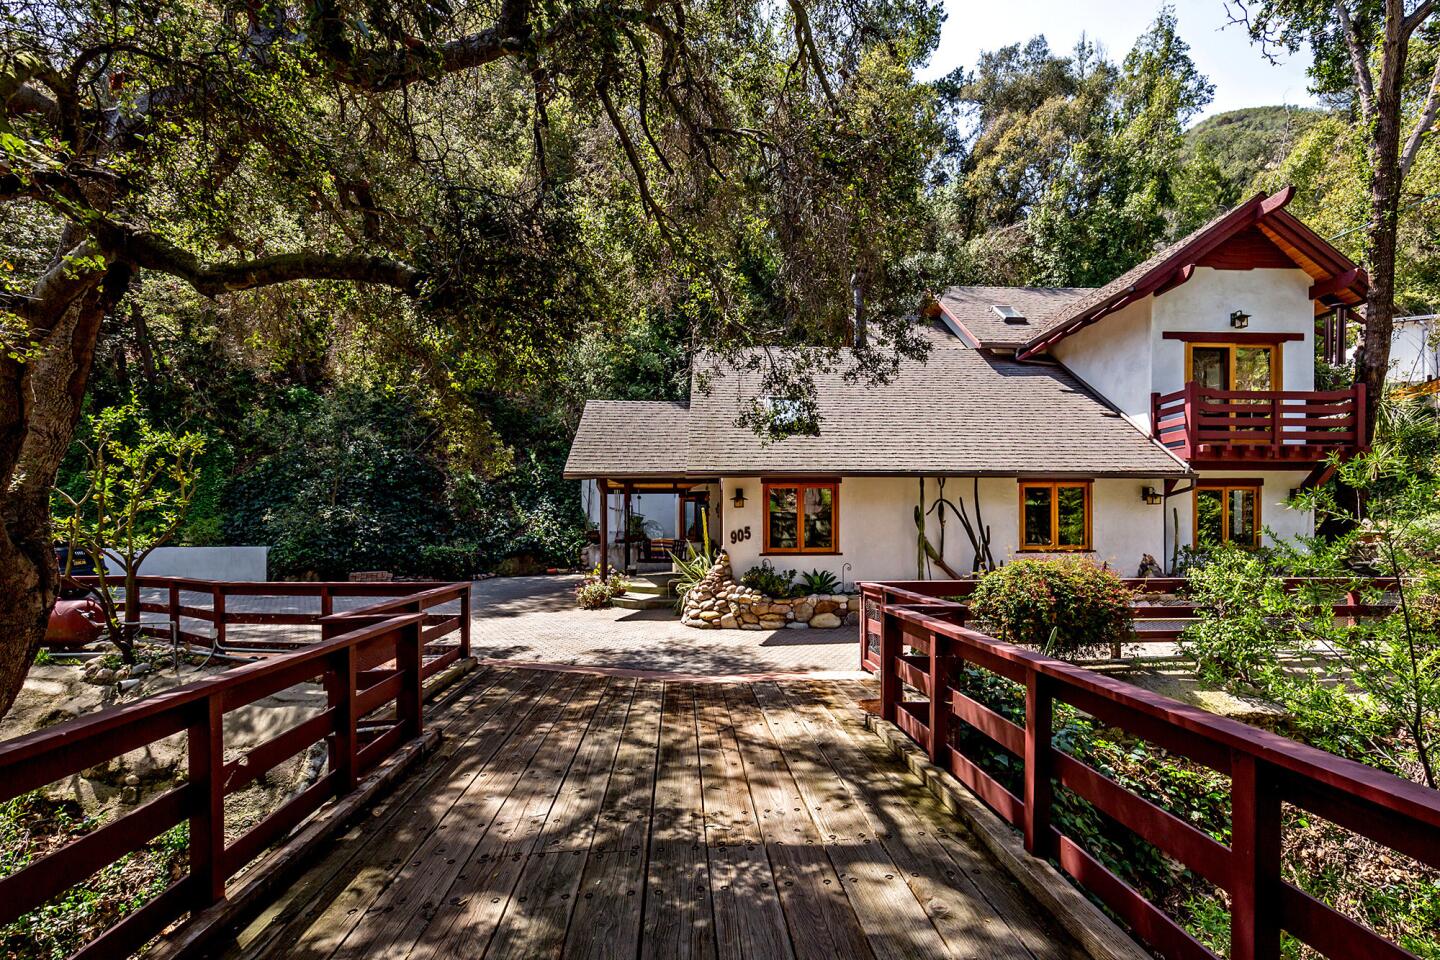 John Kassir, who voiced the Crypt Keeper on HBO's "Tales From the Crypt" is asking about $1.8 million for his charming Craftsman home in Topanga Canyon.